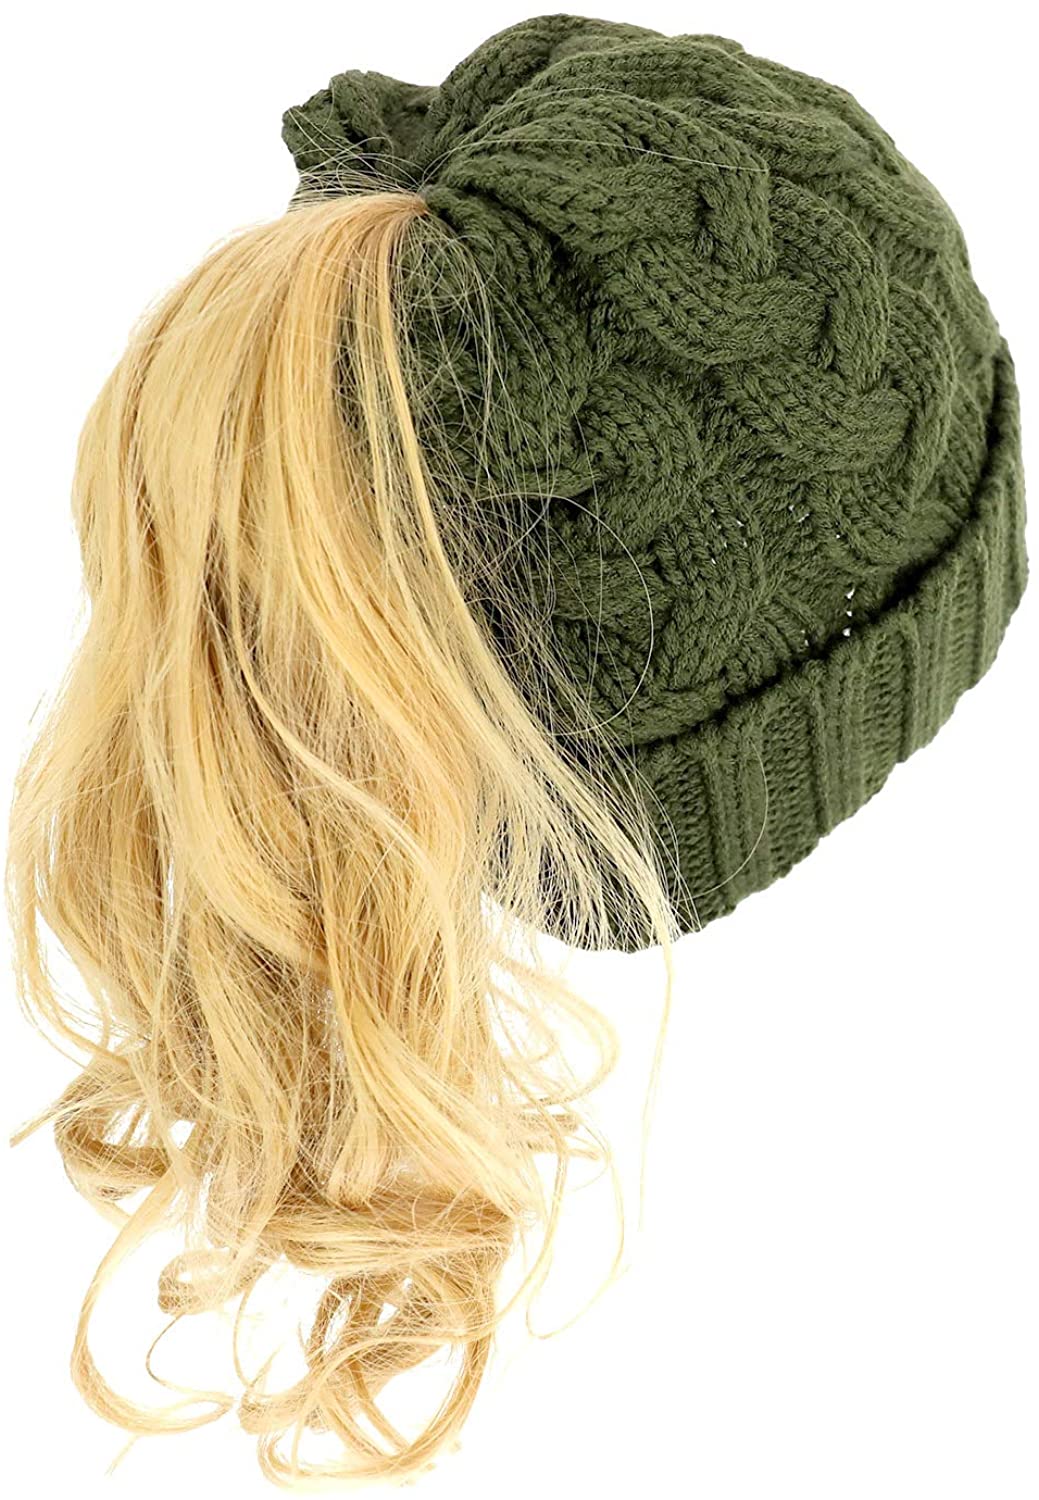 Armycrew Cable Knit Messy Bun Hair Winter Ponytail Beanie Cap